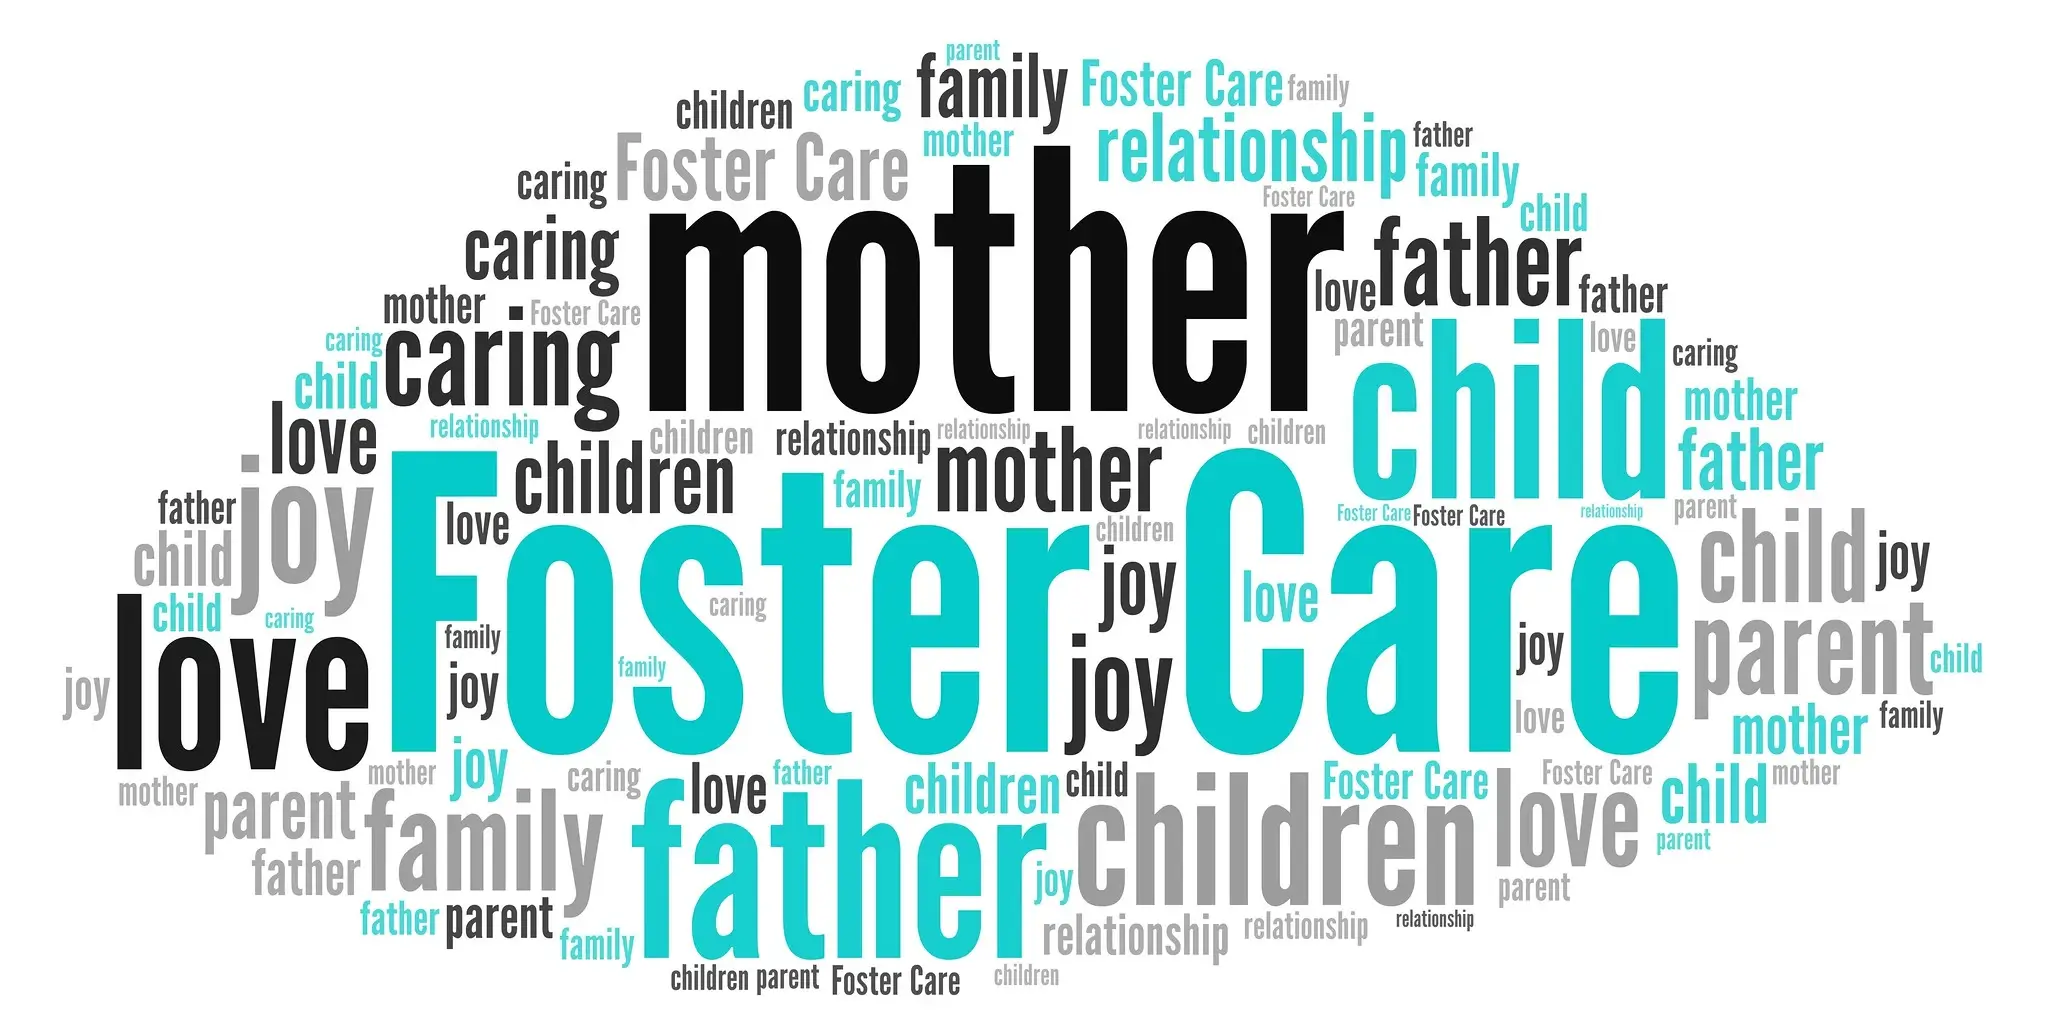 how to become a foster parent in ontario